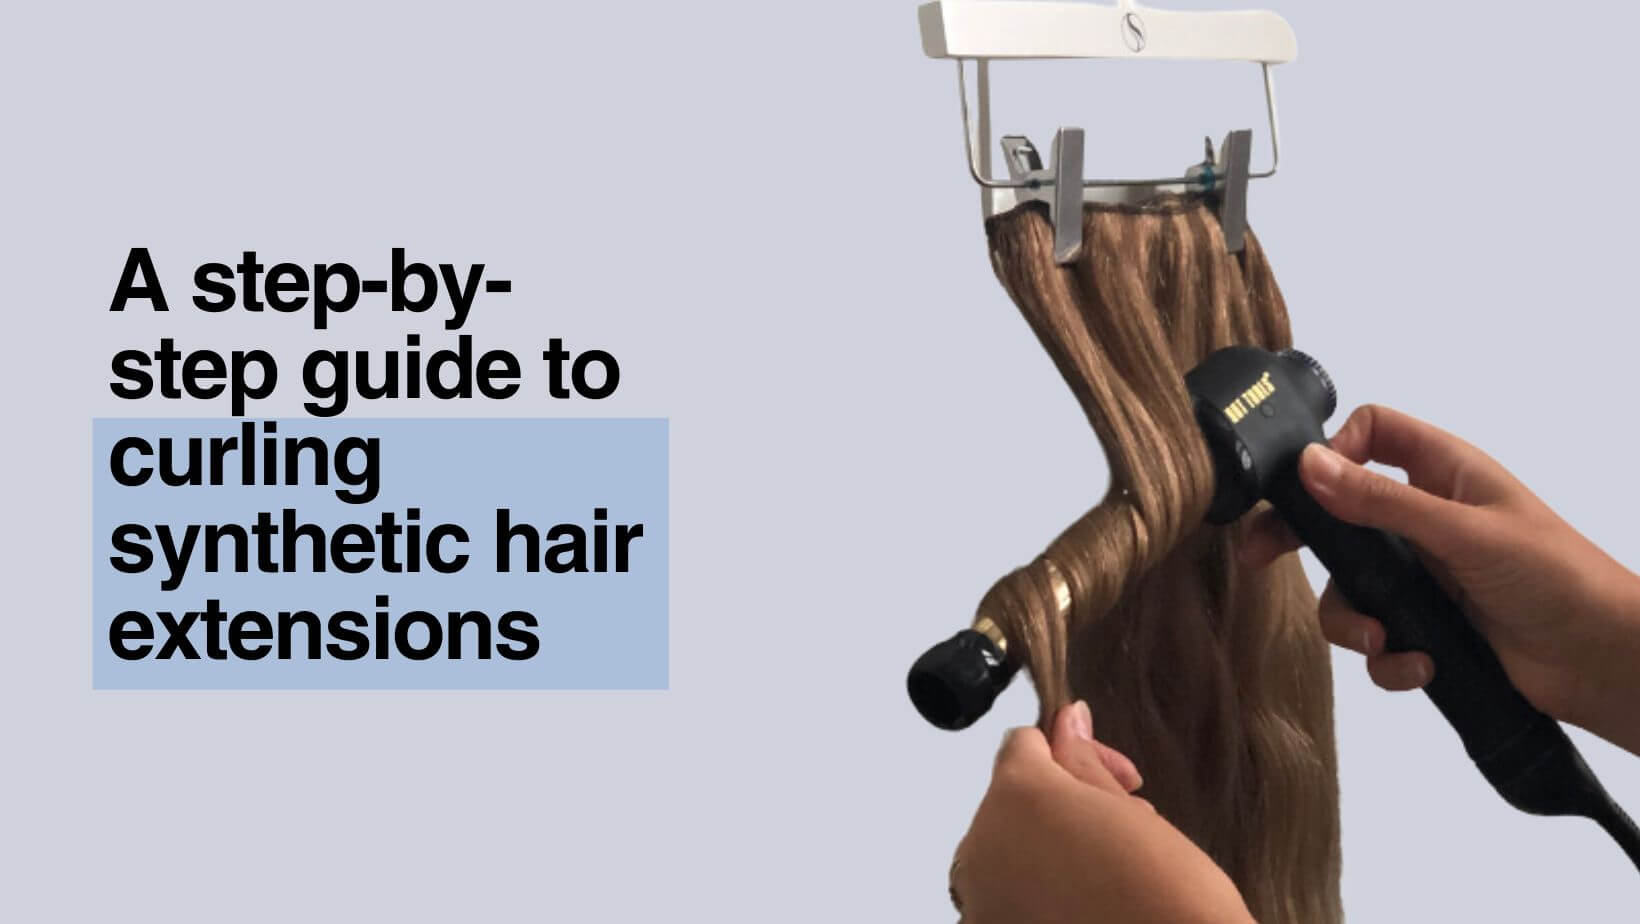 A step-by-step guide to curling synthetic hair extensions